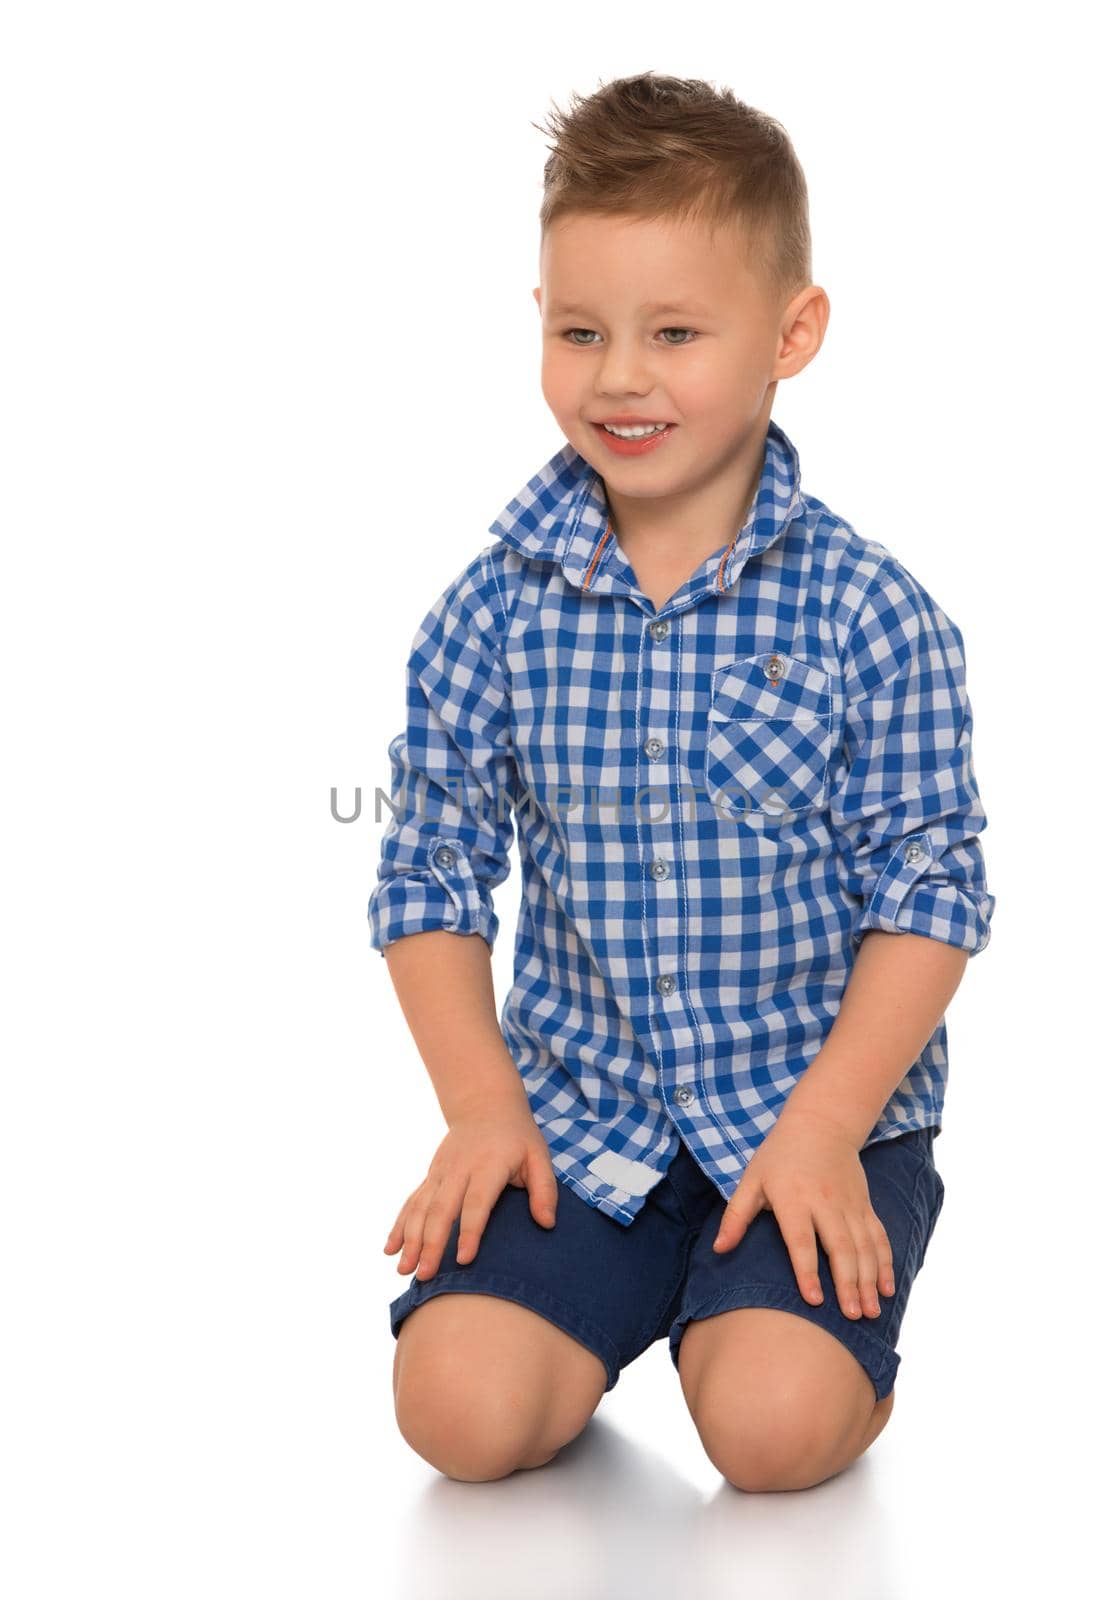 Beautiful little boy in shirt with short sleeves and shorts. The boy sits on the floor. - Isolated on white background